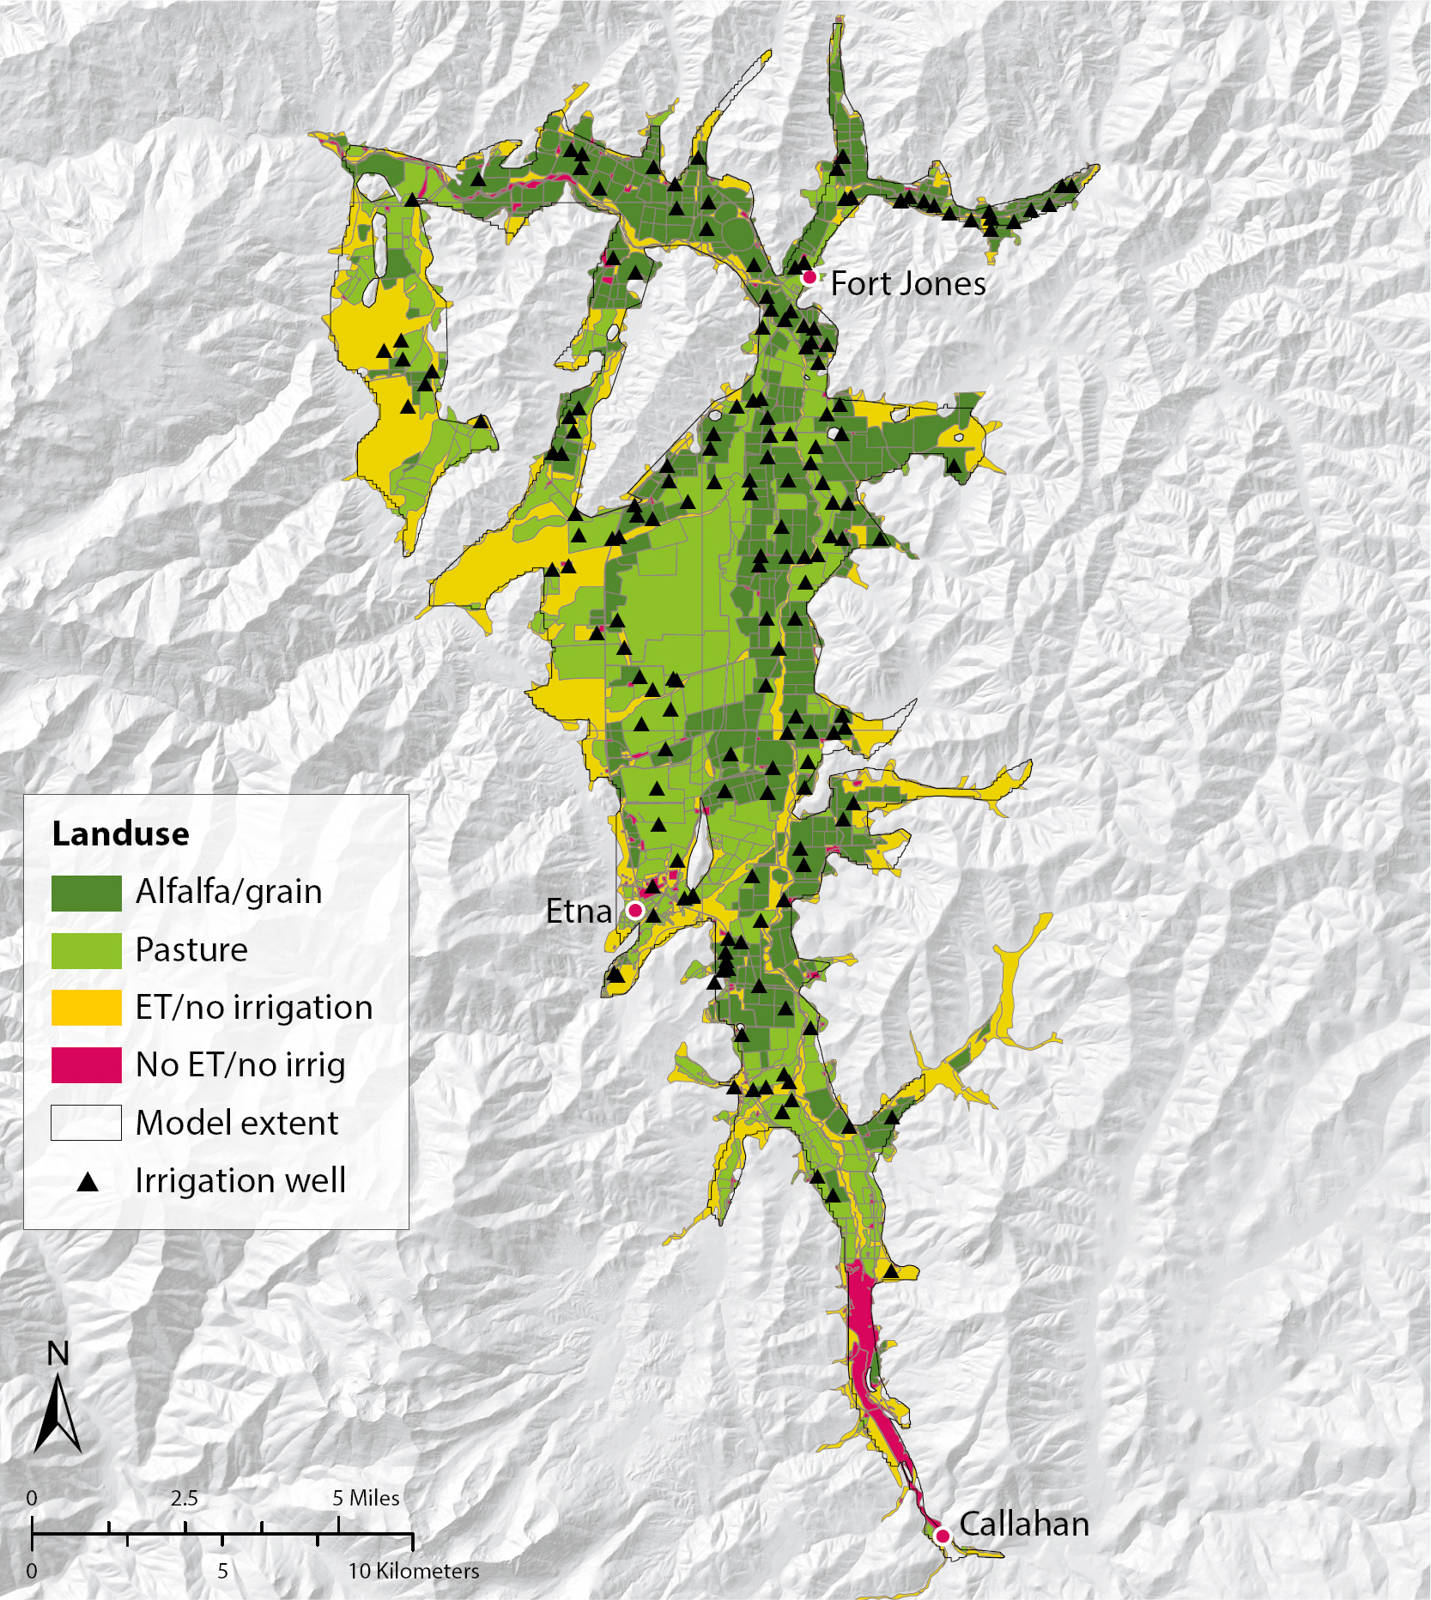 Land use information and well locations in Scott Valley. ET/no irrigation reflects nonirrigated vegetation, e.g., lawns and riparian vegetation. No ET/no irrigation represents nonvegetated land surfaces including the mine tailings near Callahan. Well location information was obtained from well logs filed with the Department of Water Resources and verified in the field. Source: Model extent derived from Mack (1958) and SSURGO data. Land use polygon data source: DWR (2000). Revised to reflect 2011 land use patterns (GWAC, Groundwater Advisory Committee). Projection: North American Datum 1983, UTM Zone 10.